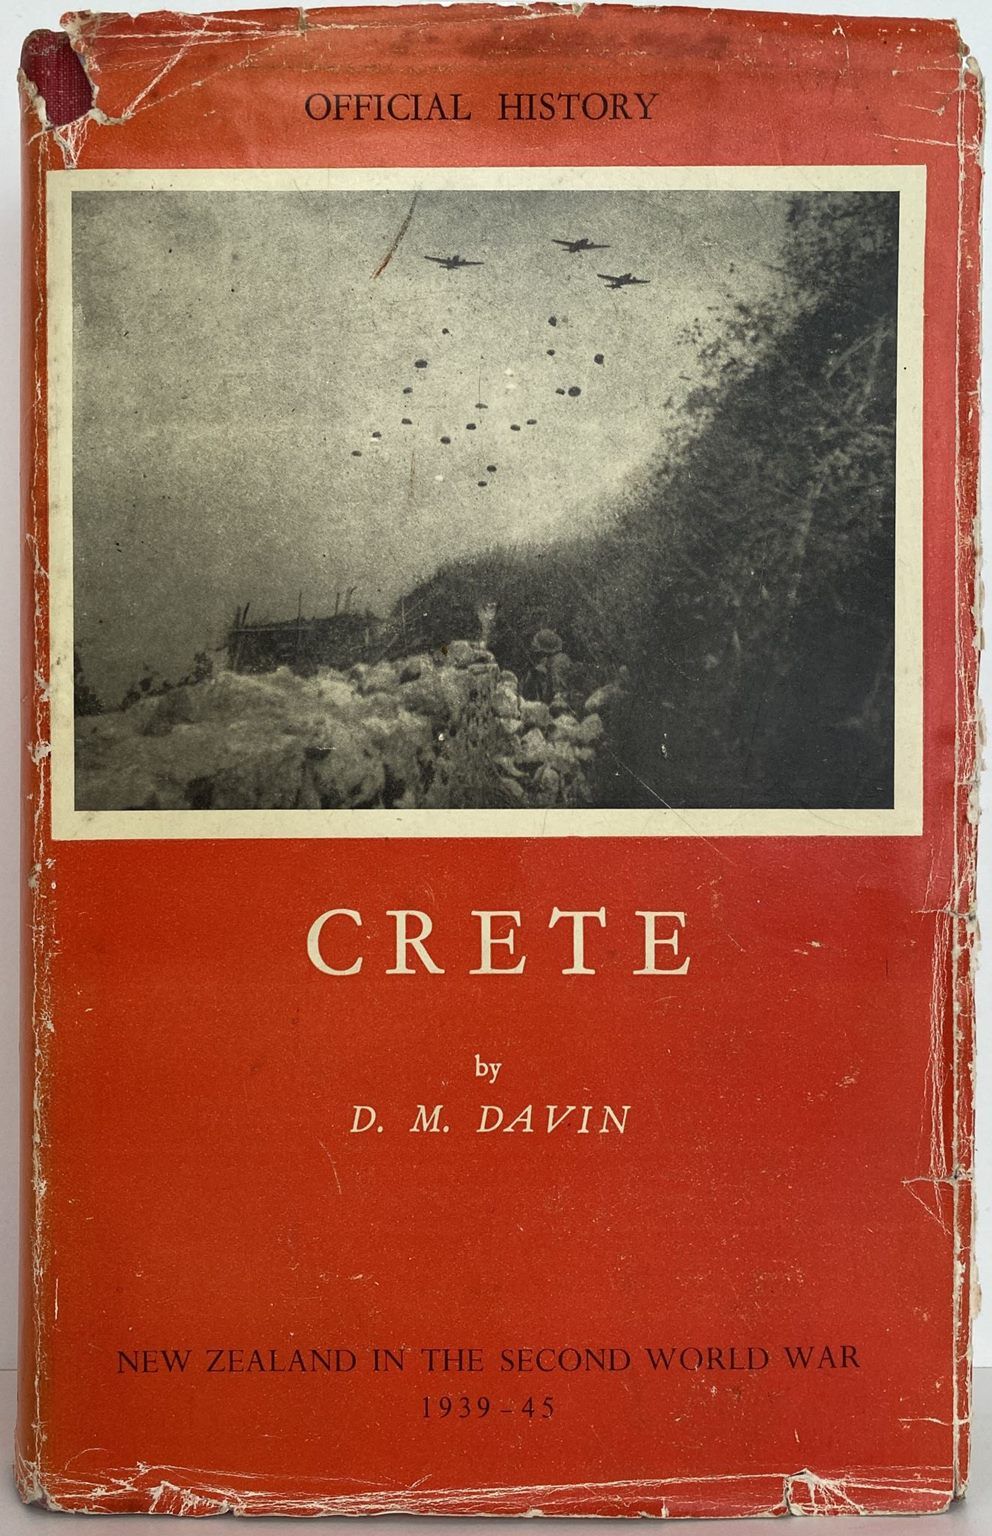 CRETE: Official History of New Zealand in the Second World War 1939-45